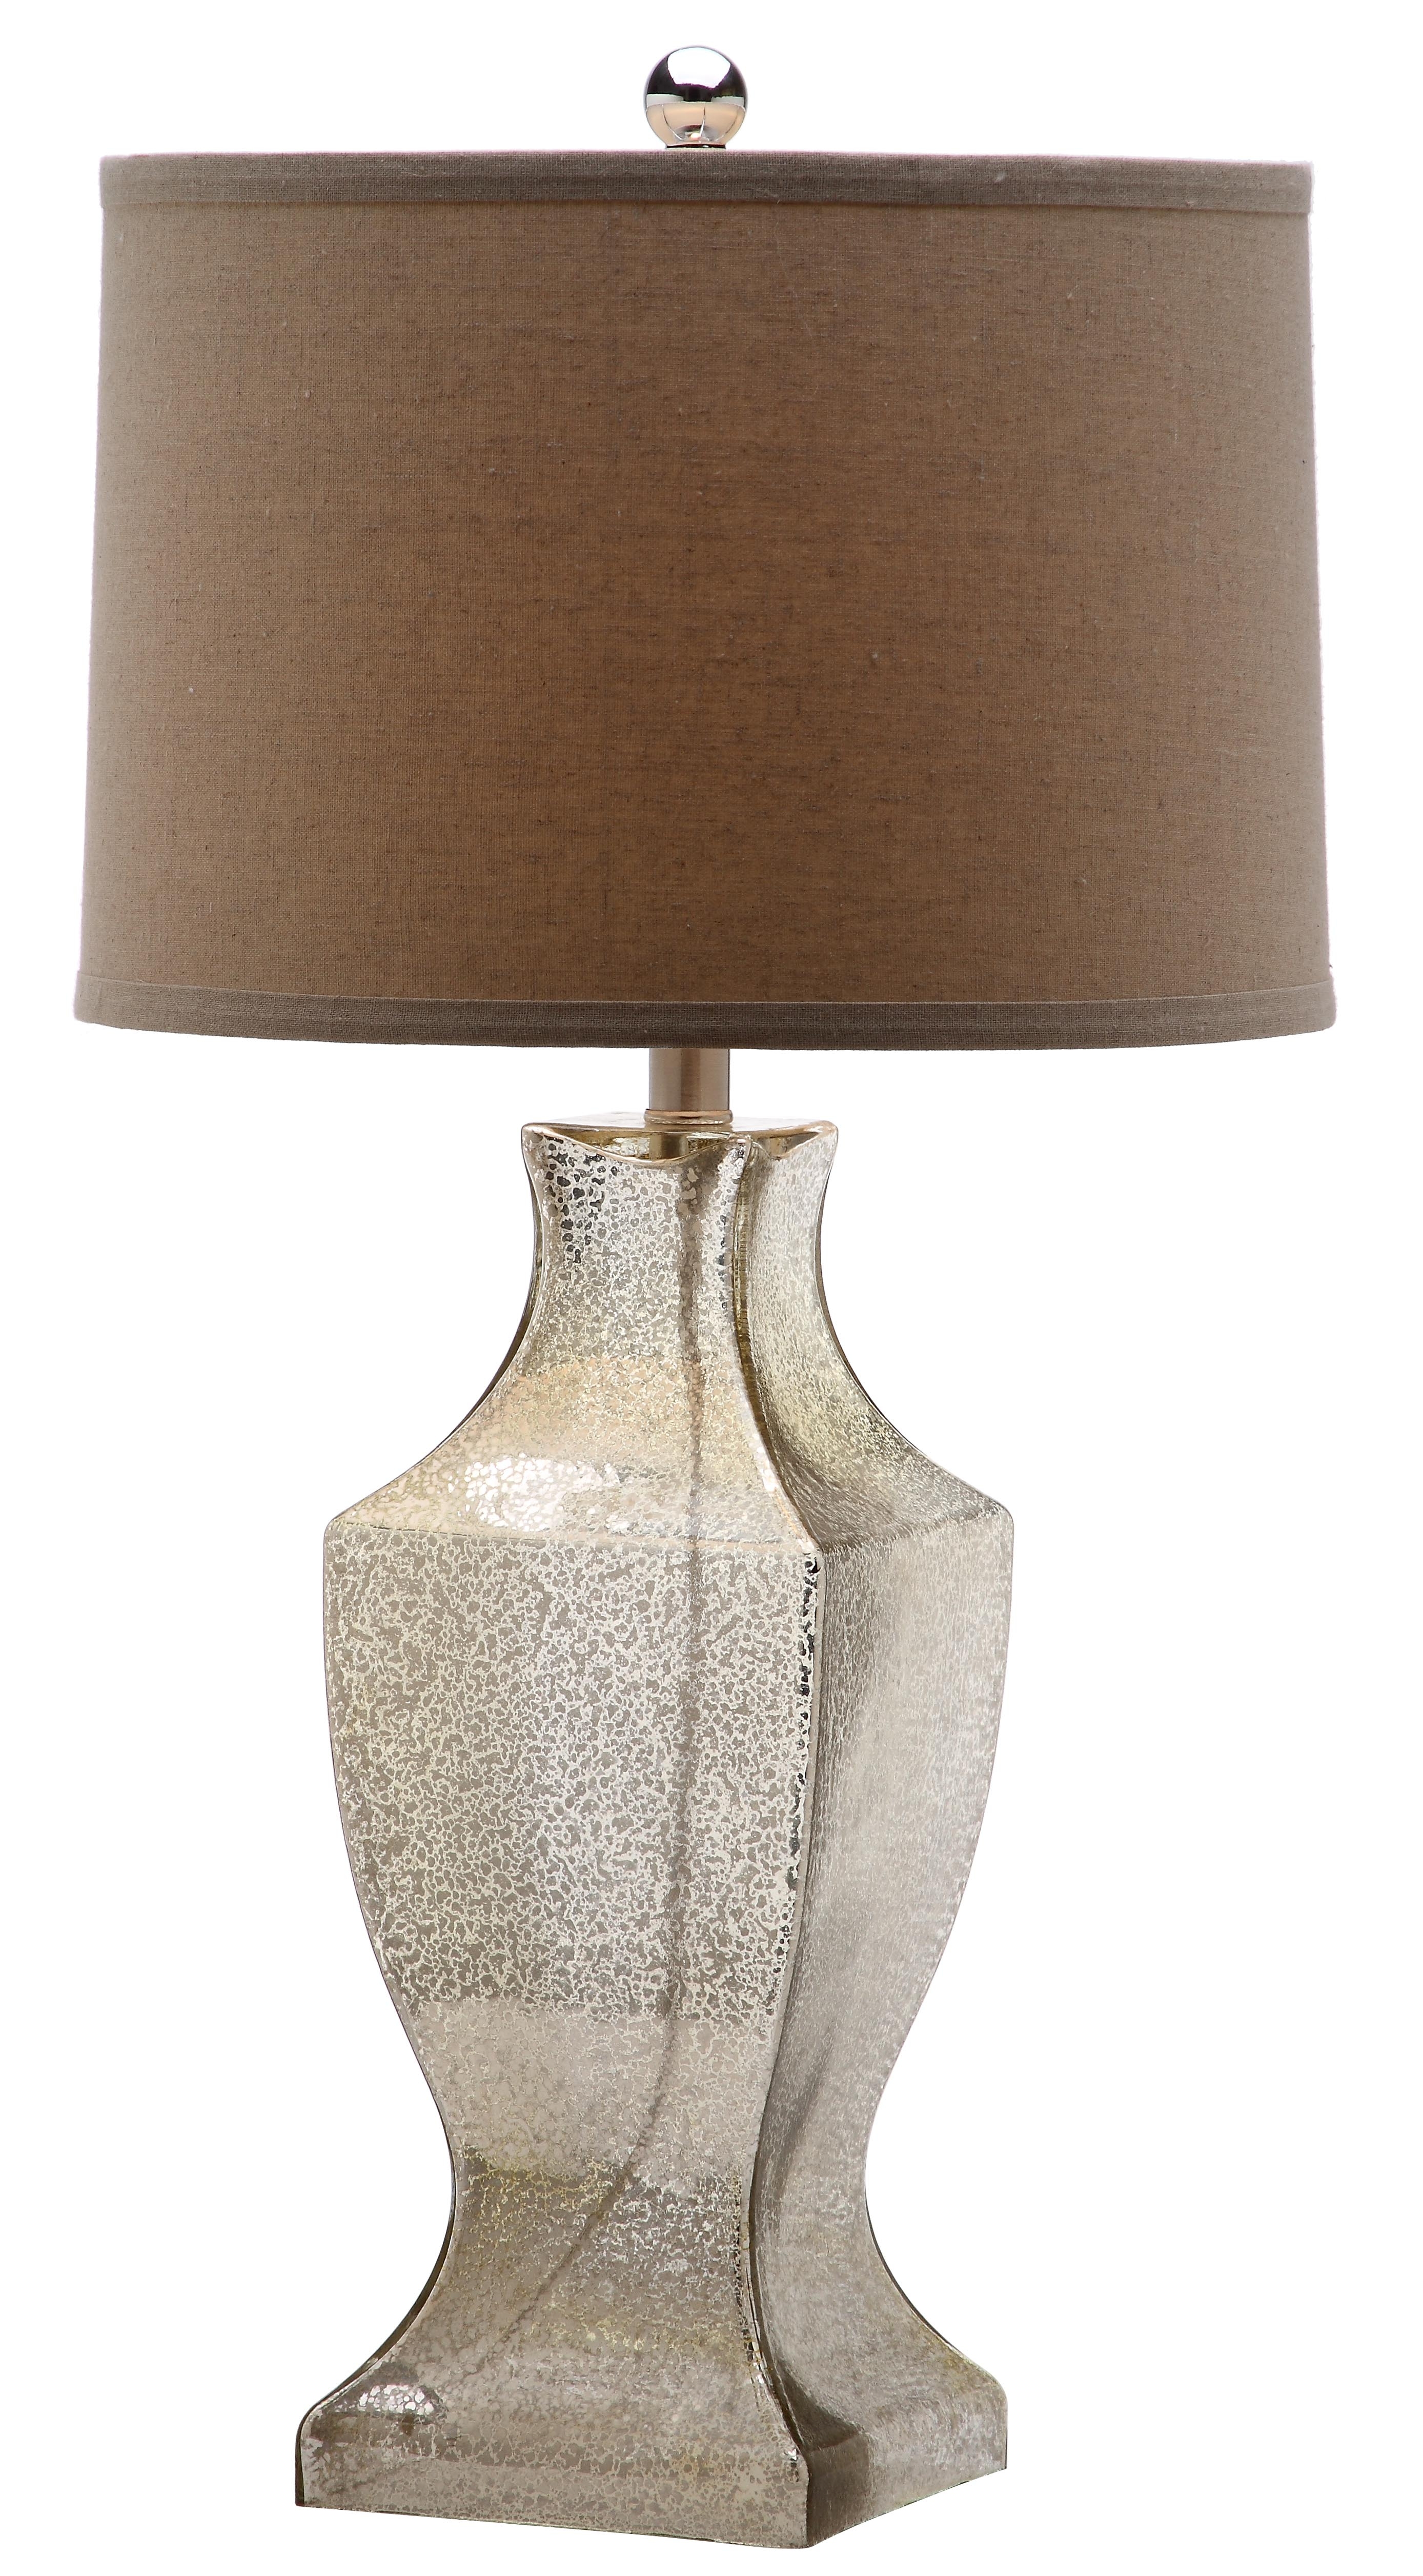 Glass 29-Inch H Bottom Table Lamp - Ivory/Silver - Arlo Home - Image 2